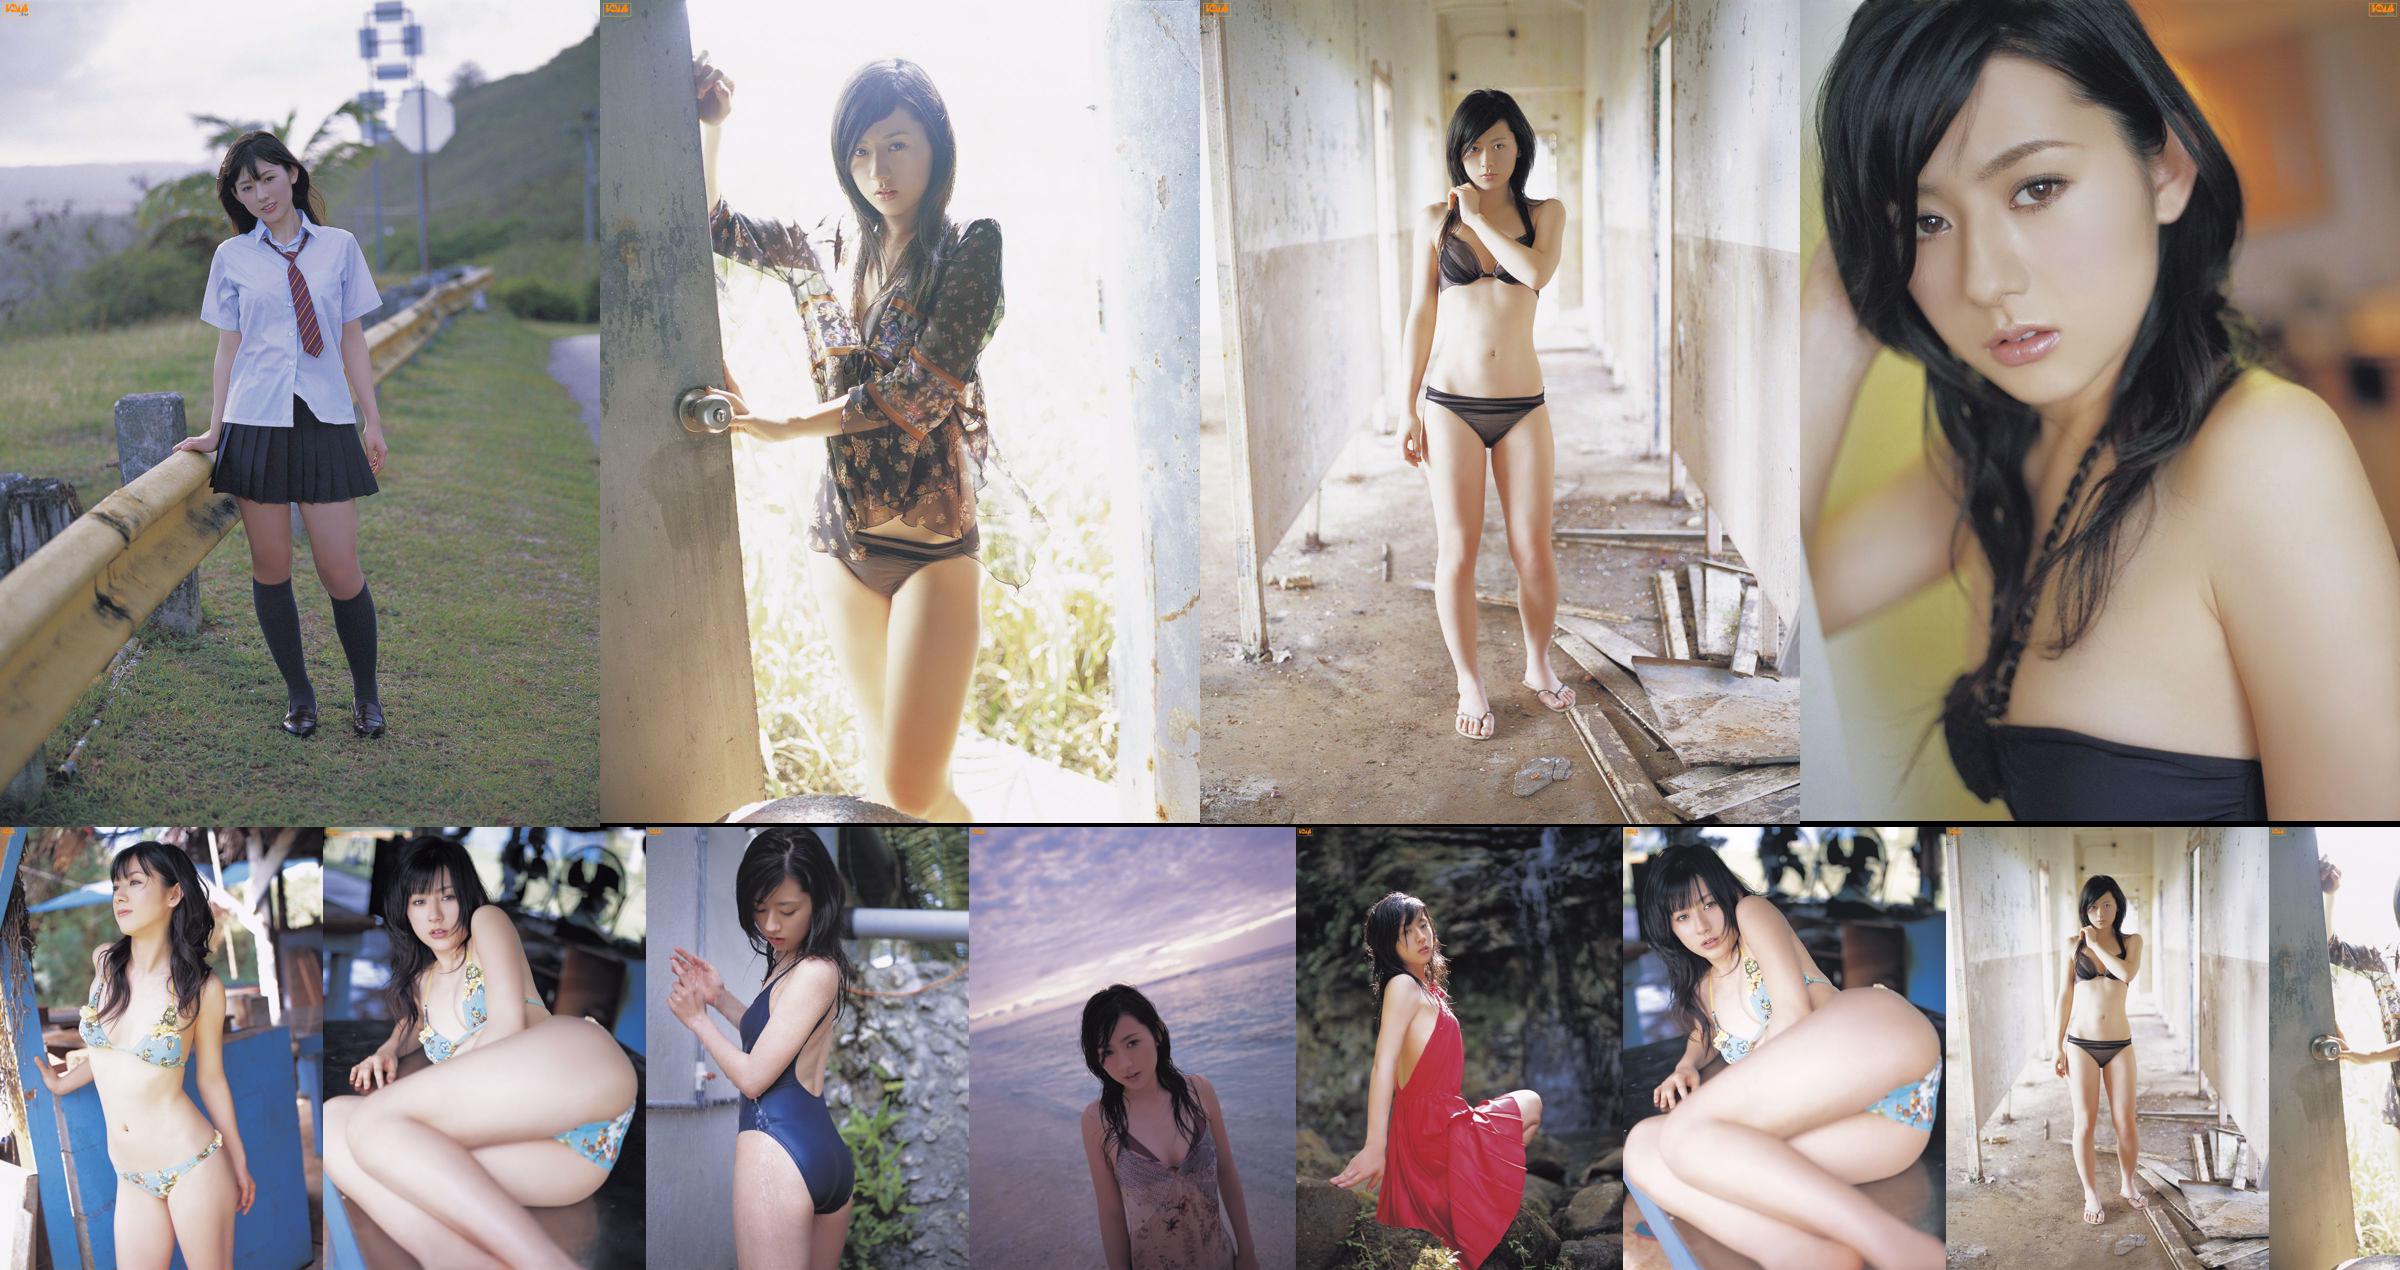 [Bomb.TV] May 2007 Miki Inase Miki Reo / Miki Reo No.43983a Page 1